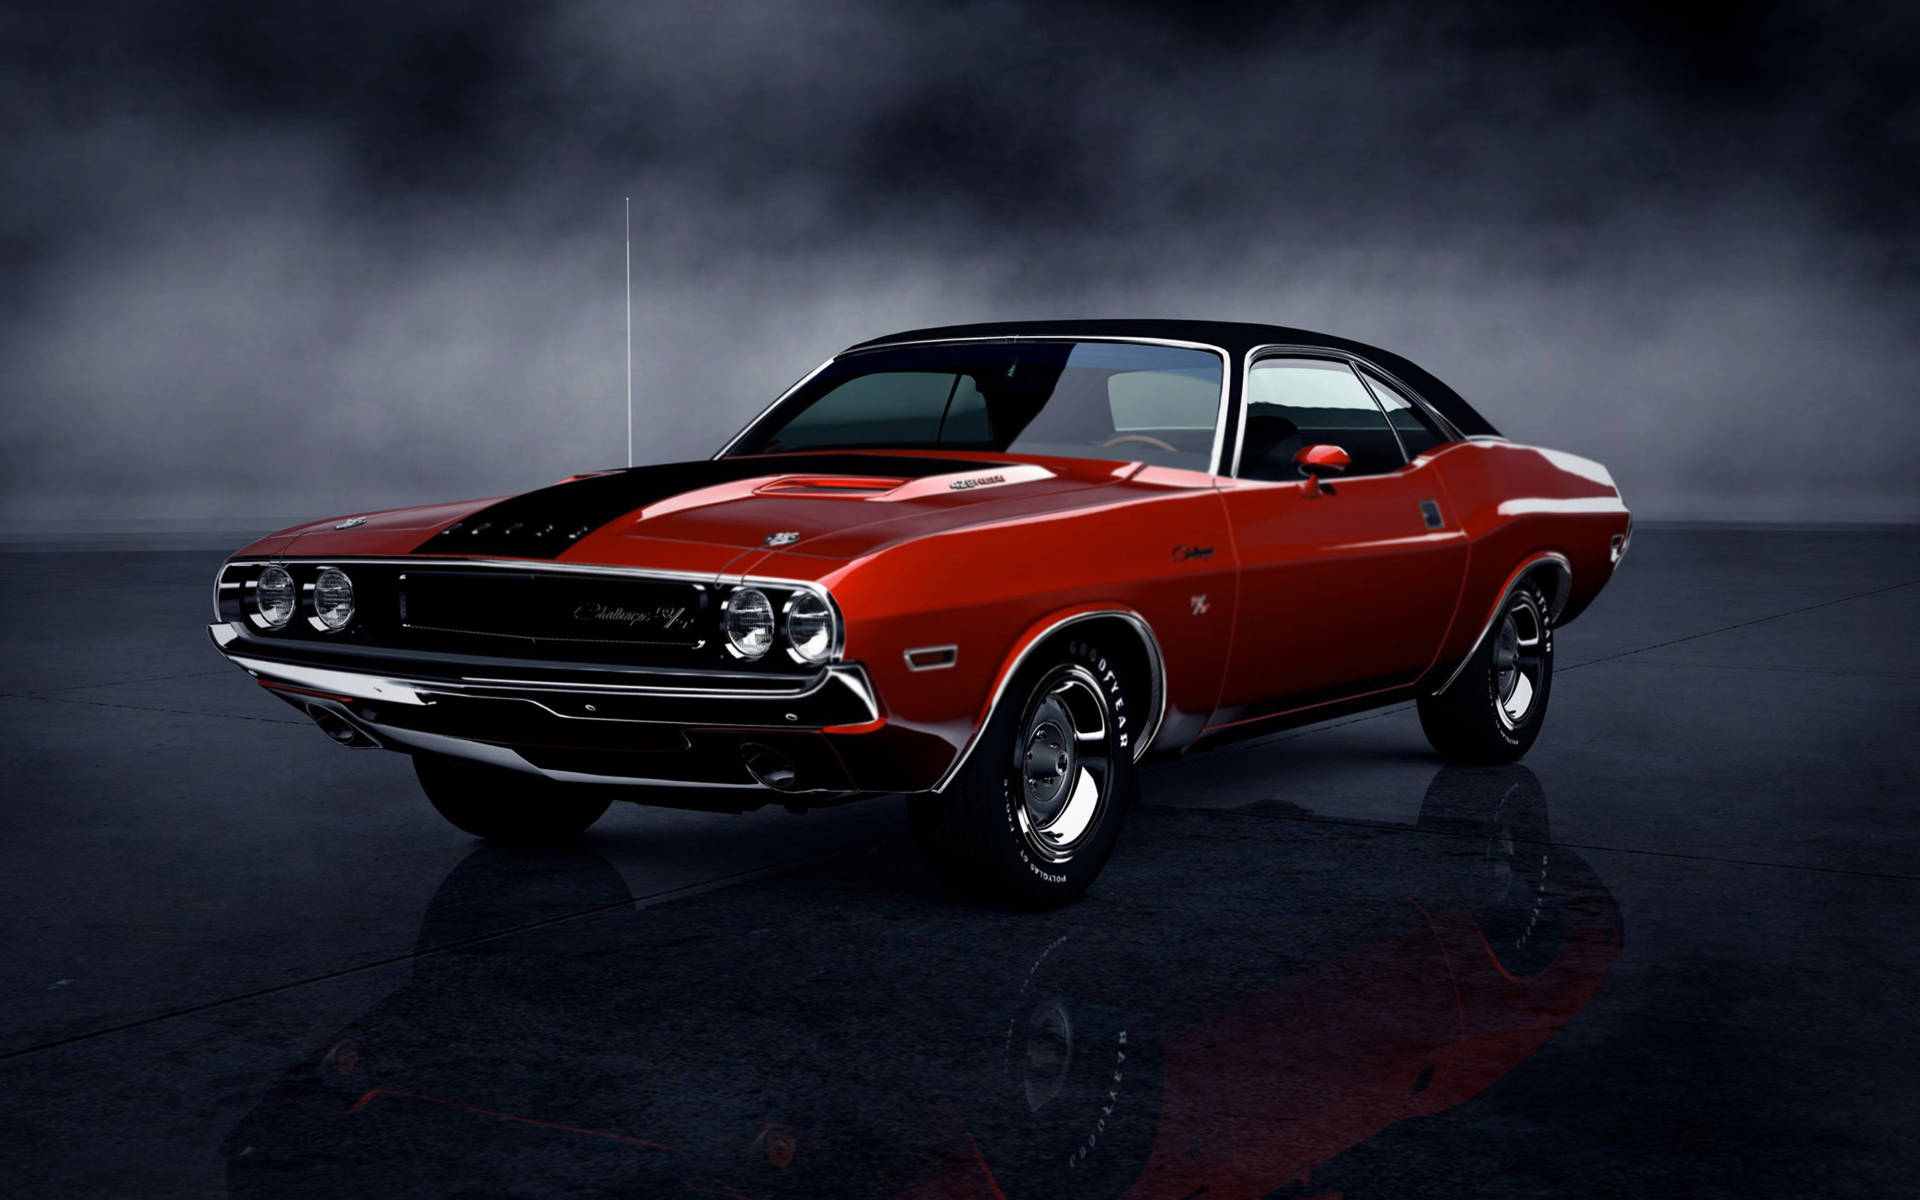 Caption: Majestic Red 1969 Dodge Charger Background